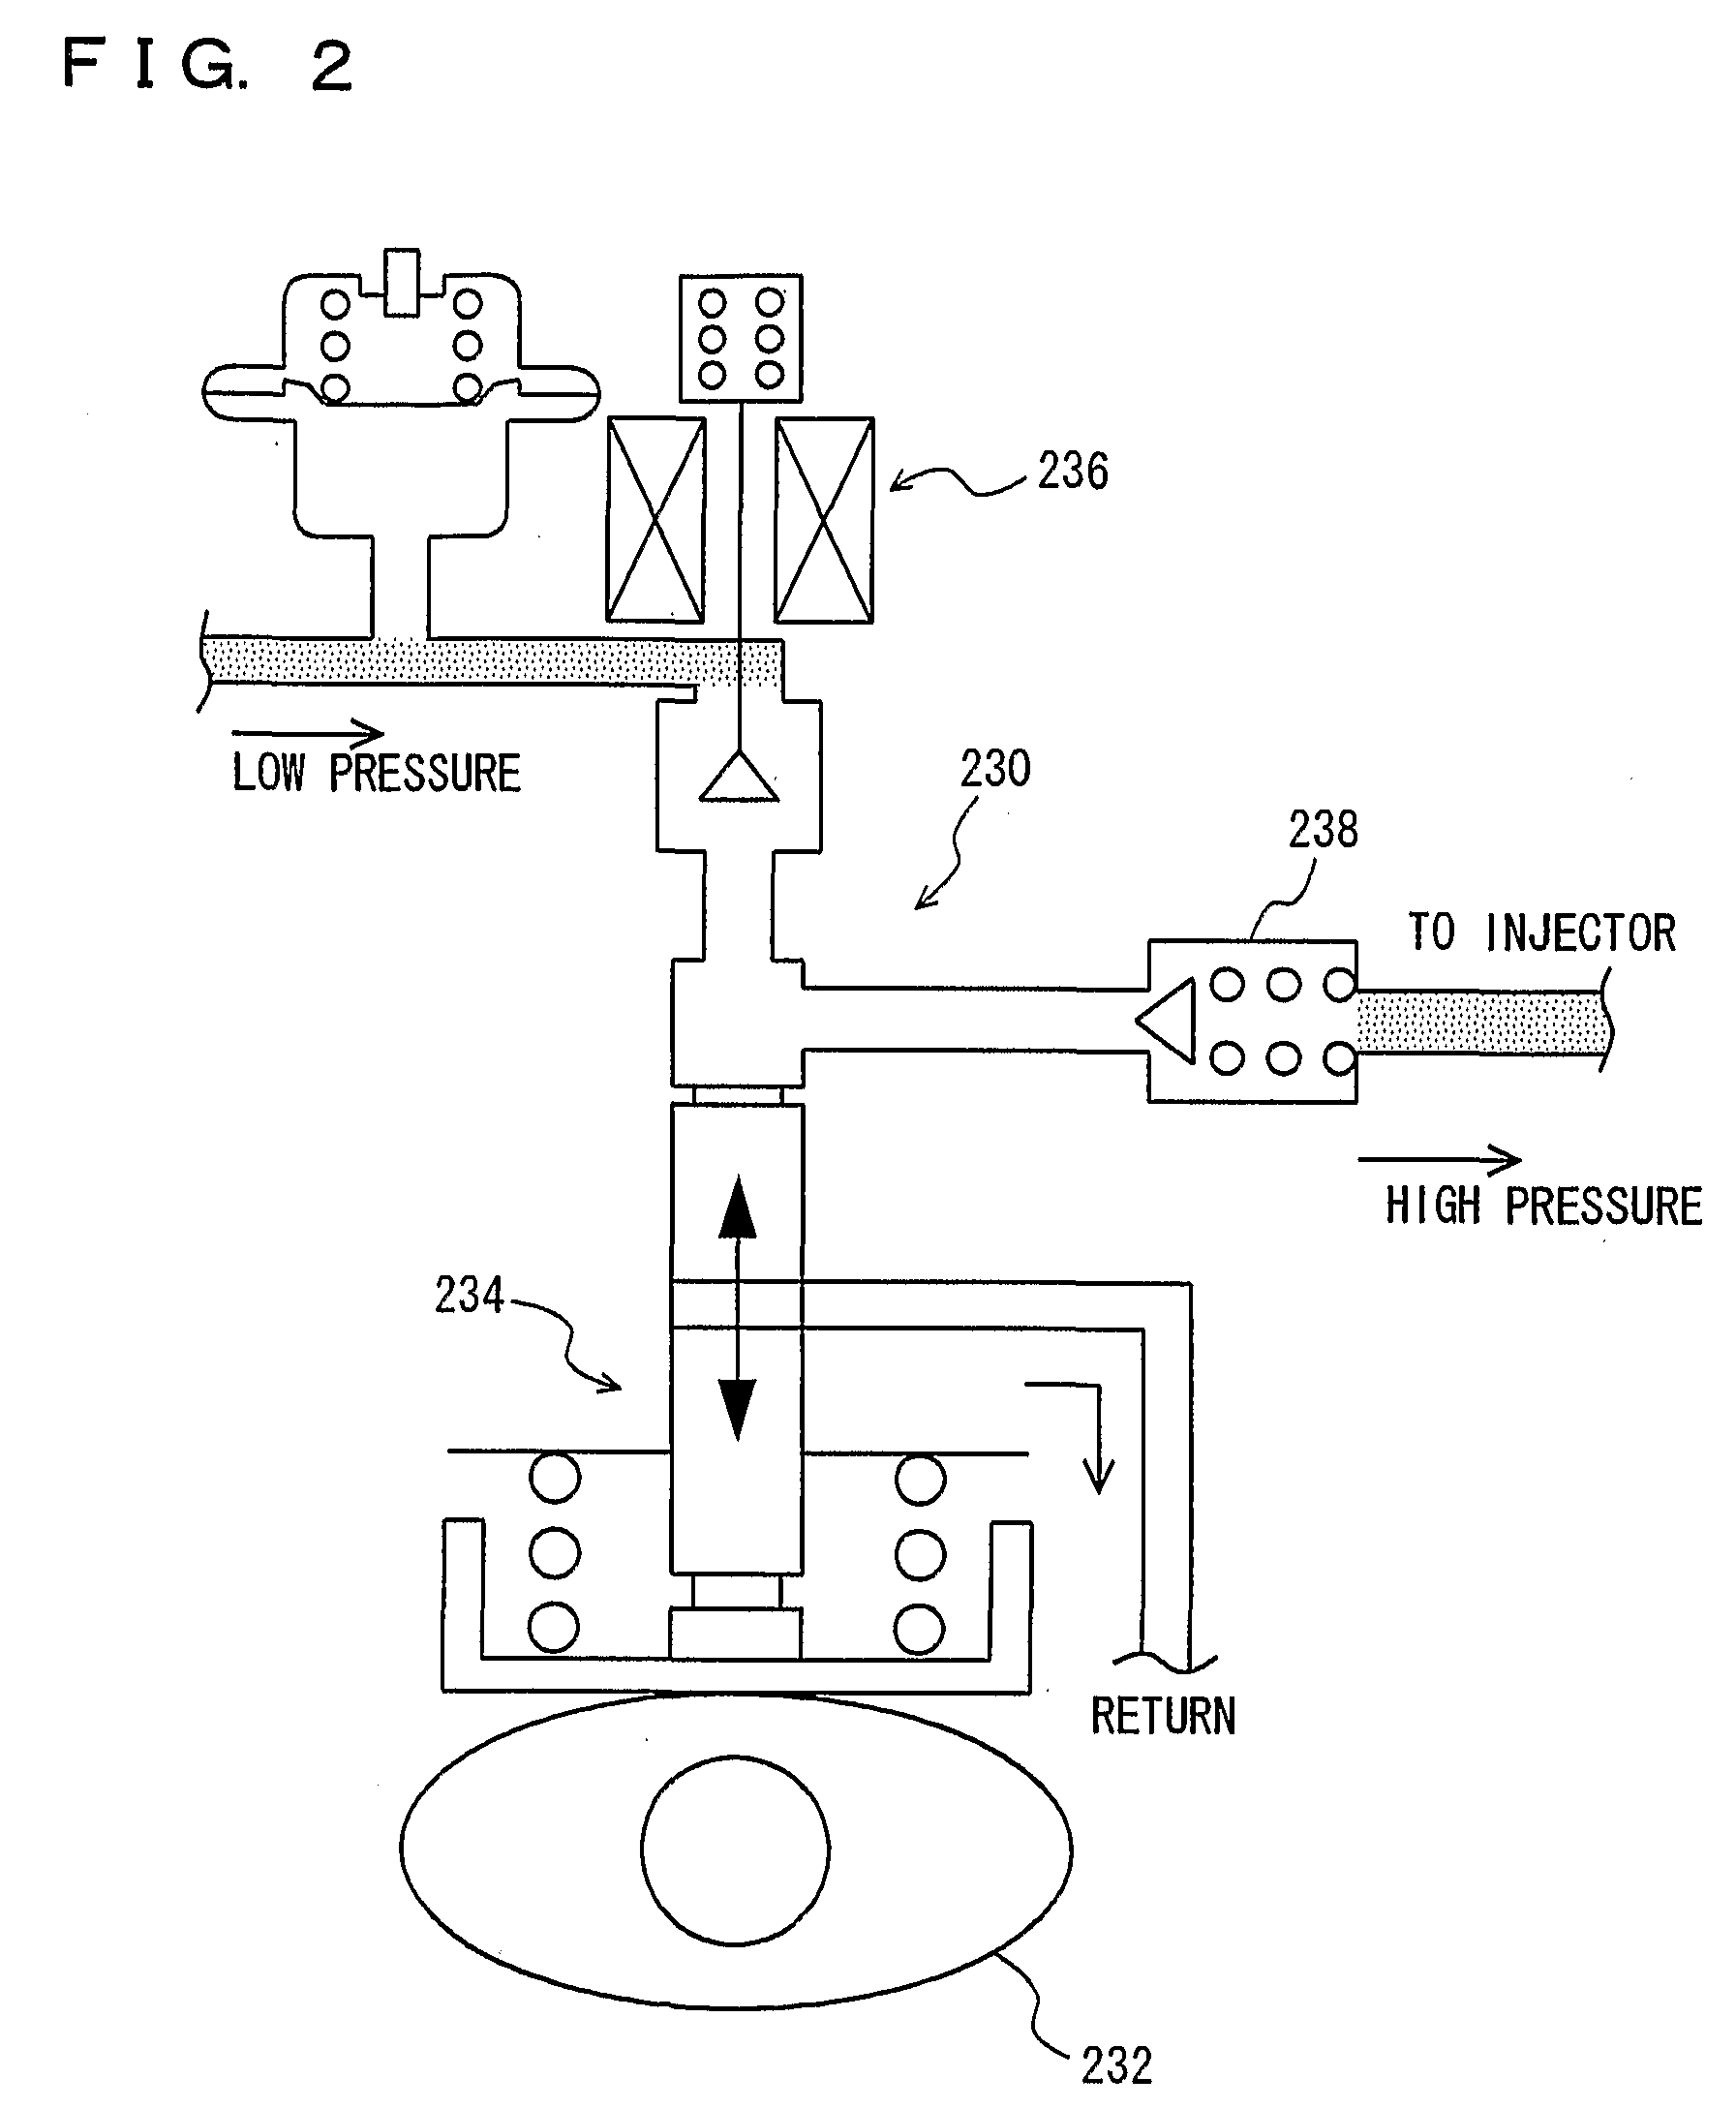 Fuel pressure control apparatus for an internal combustion engine